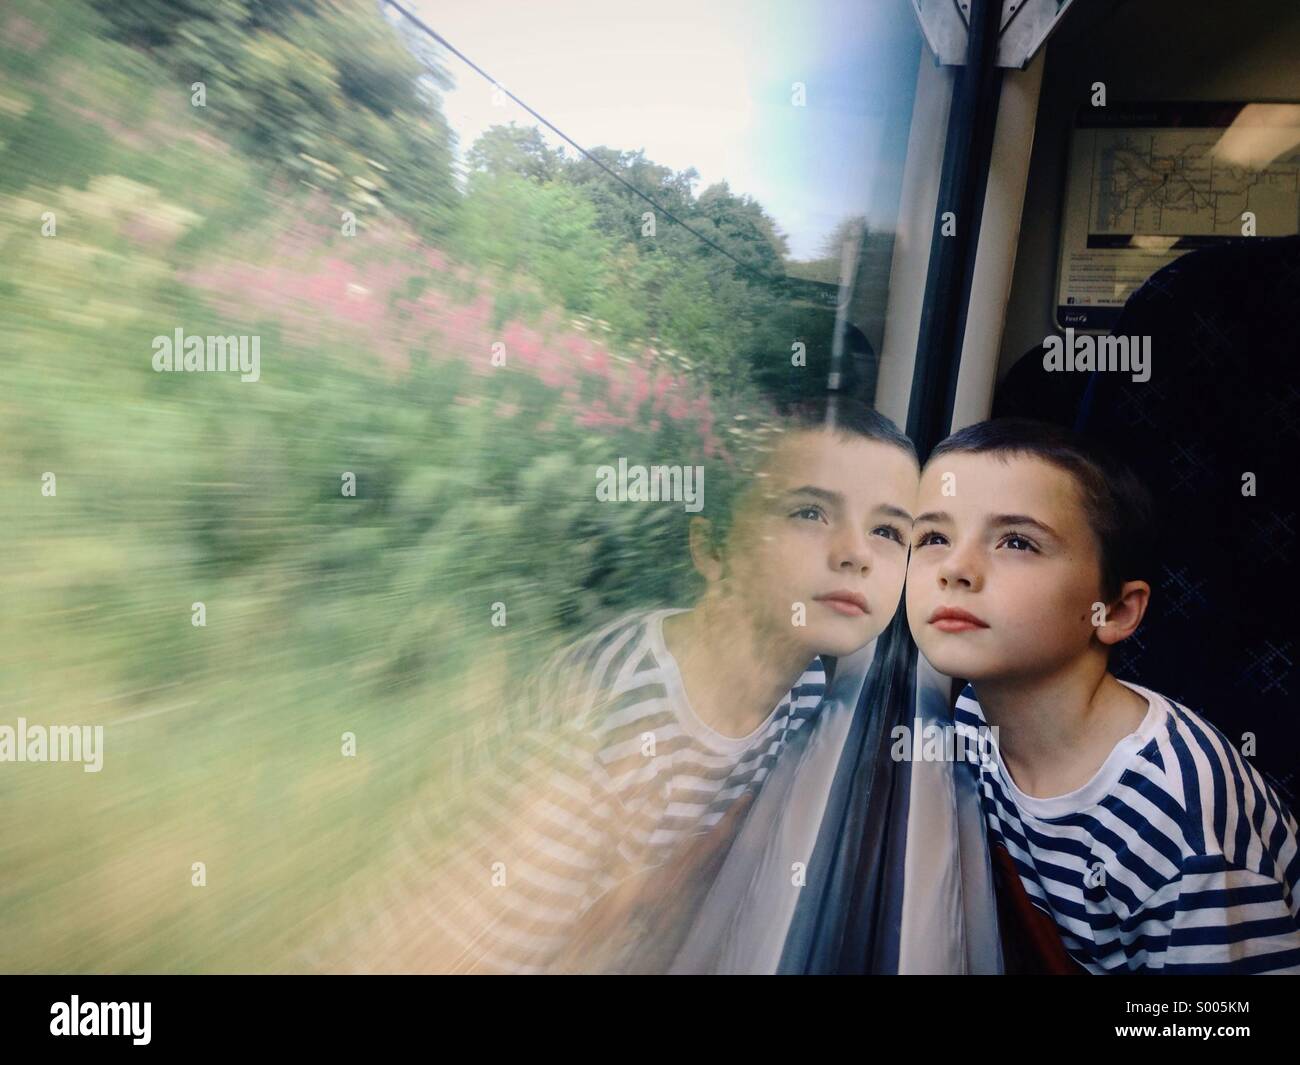 Young boy gazing out of train window Stock Photo